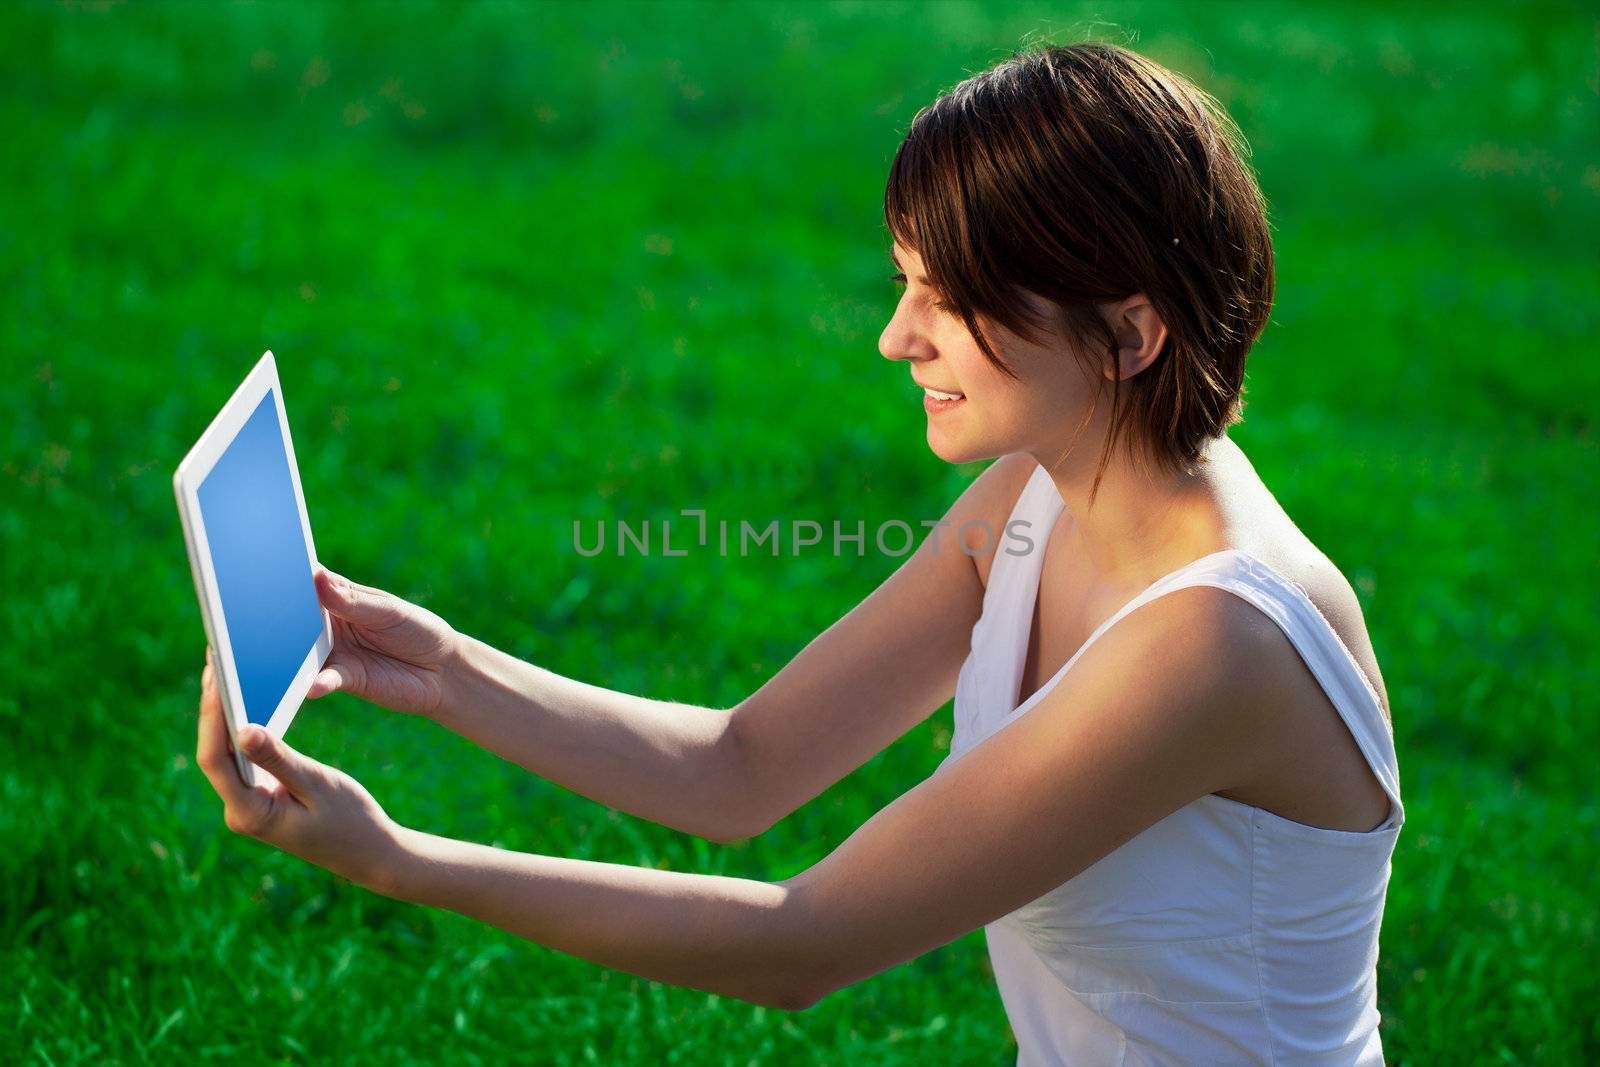 Young business woman looking at modern tablet 